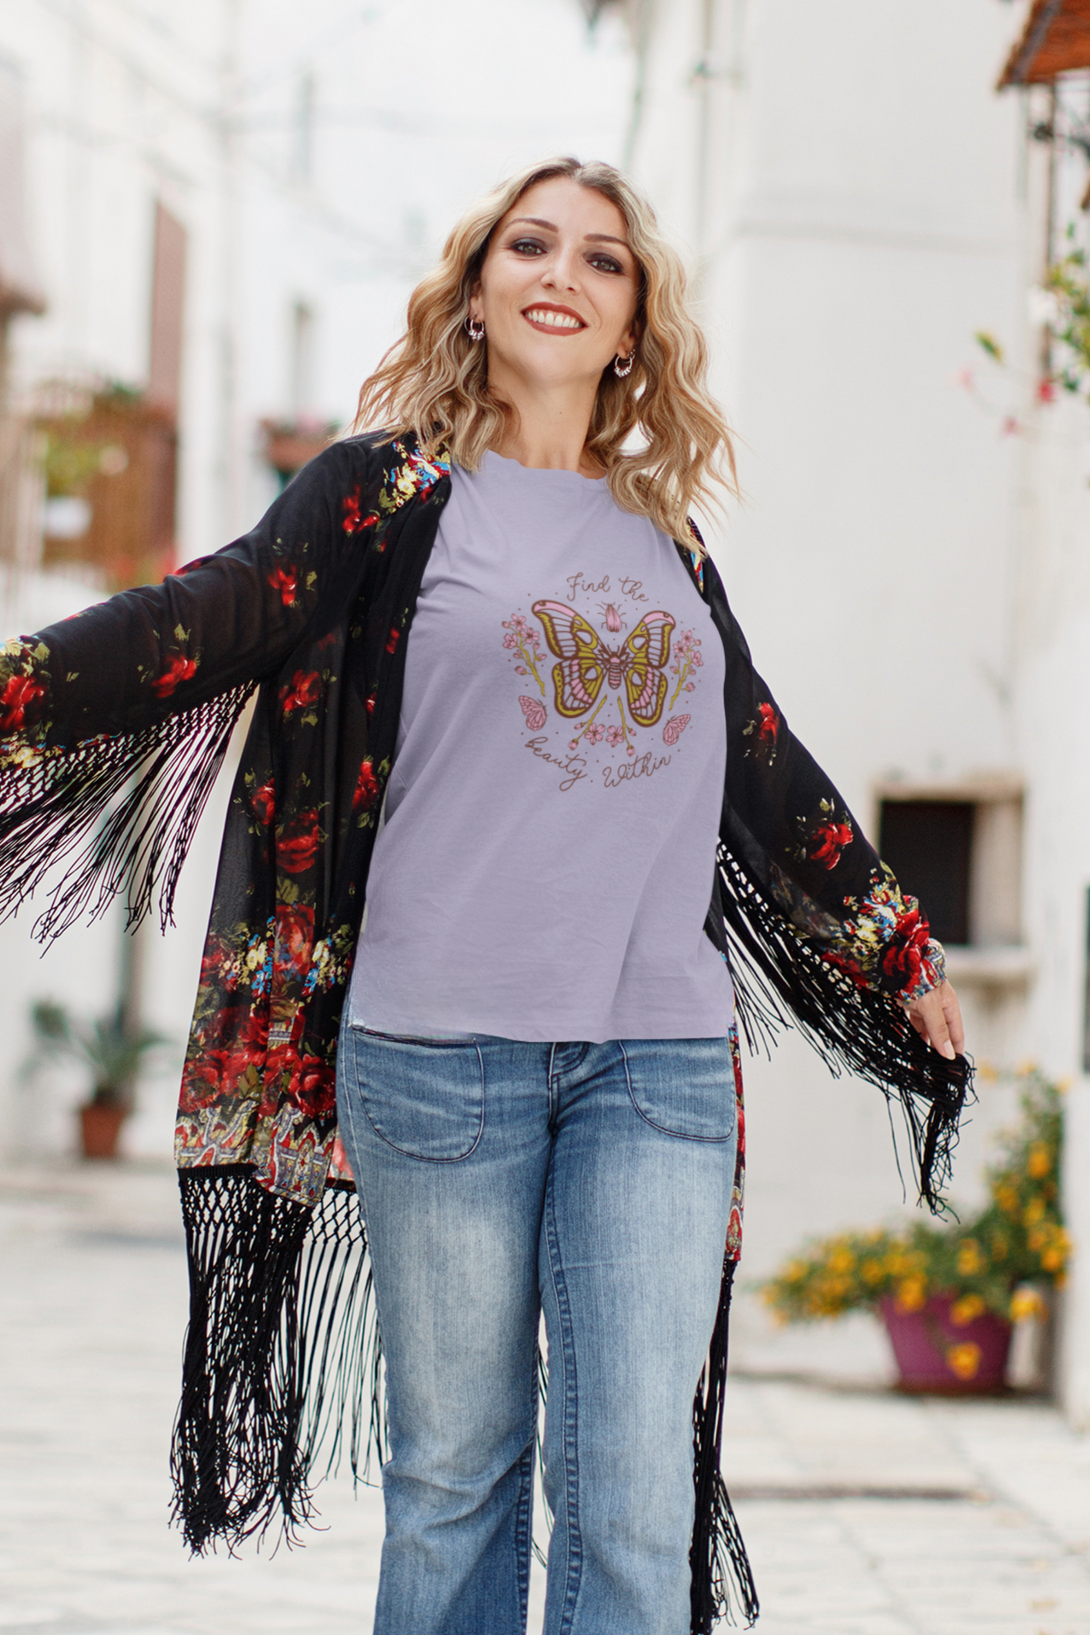 Find The Beauty Within Printed T-Shirt For Women - WowWaves - 2